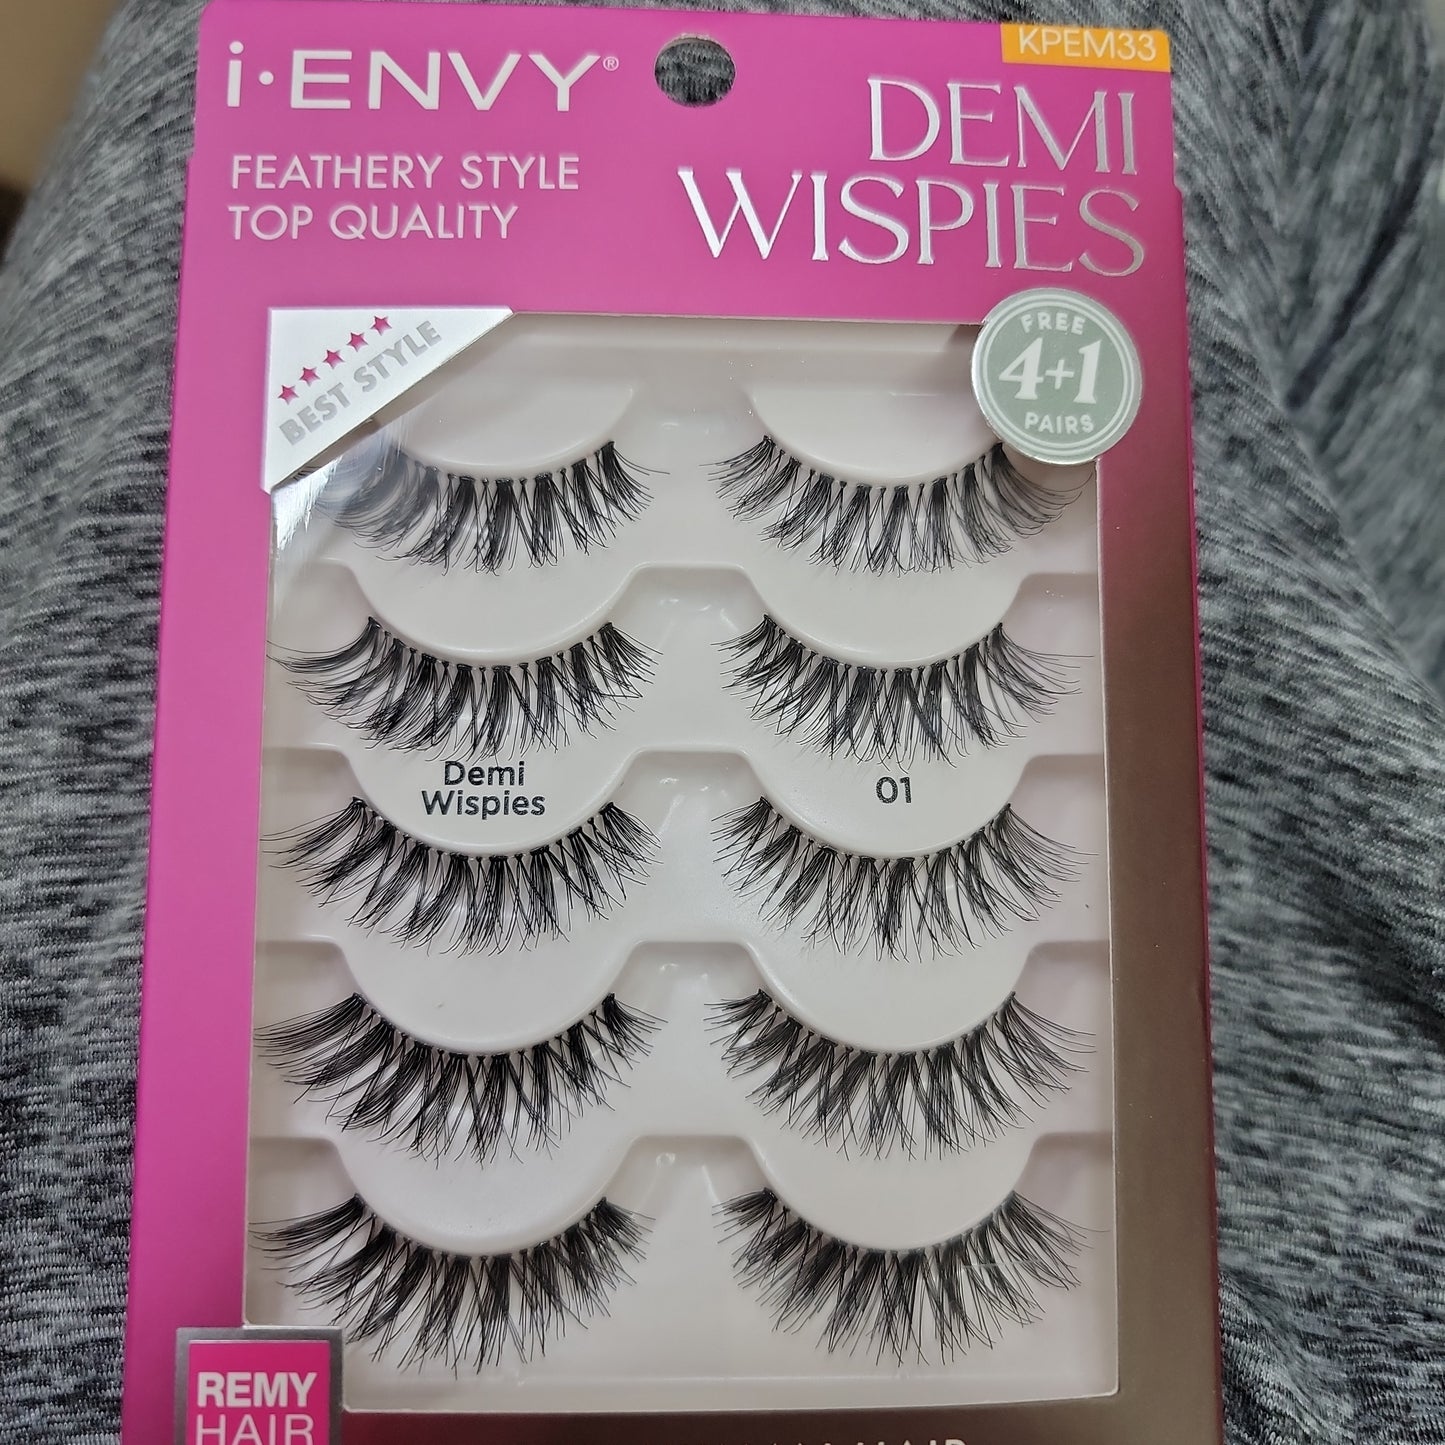 i-Envy Feathery Style Top Wuality Demi Wispies KPEM33